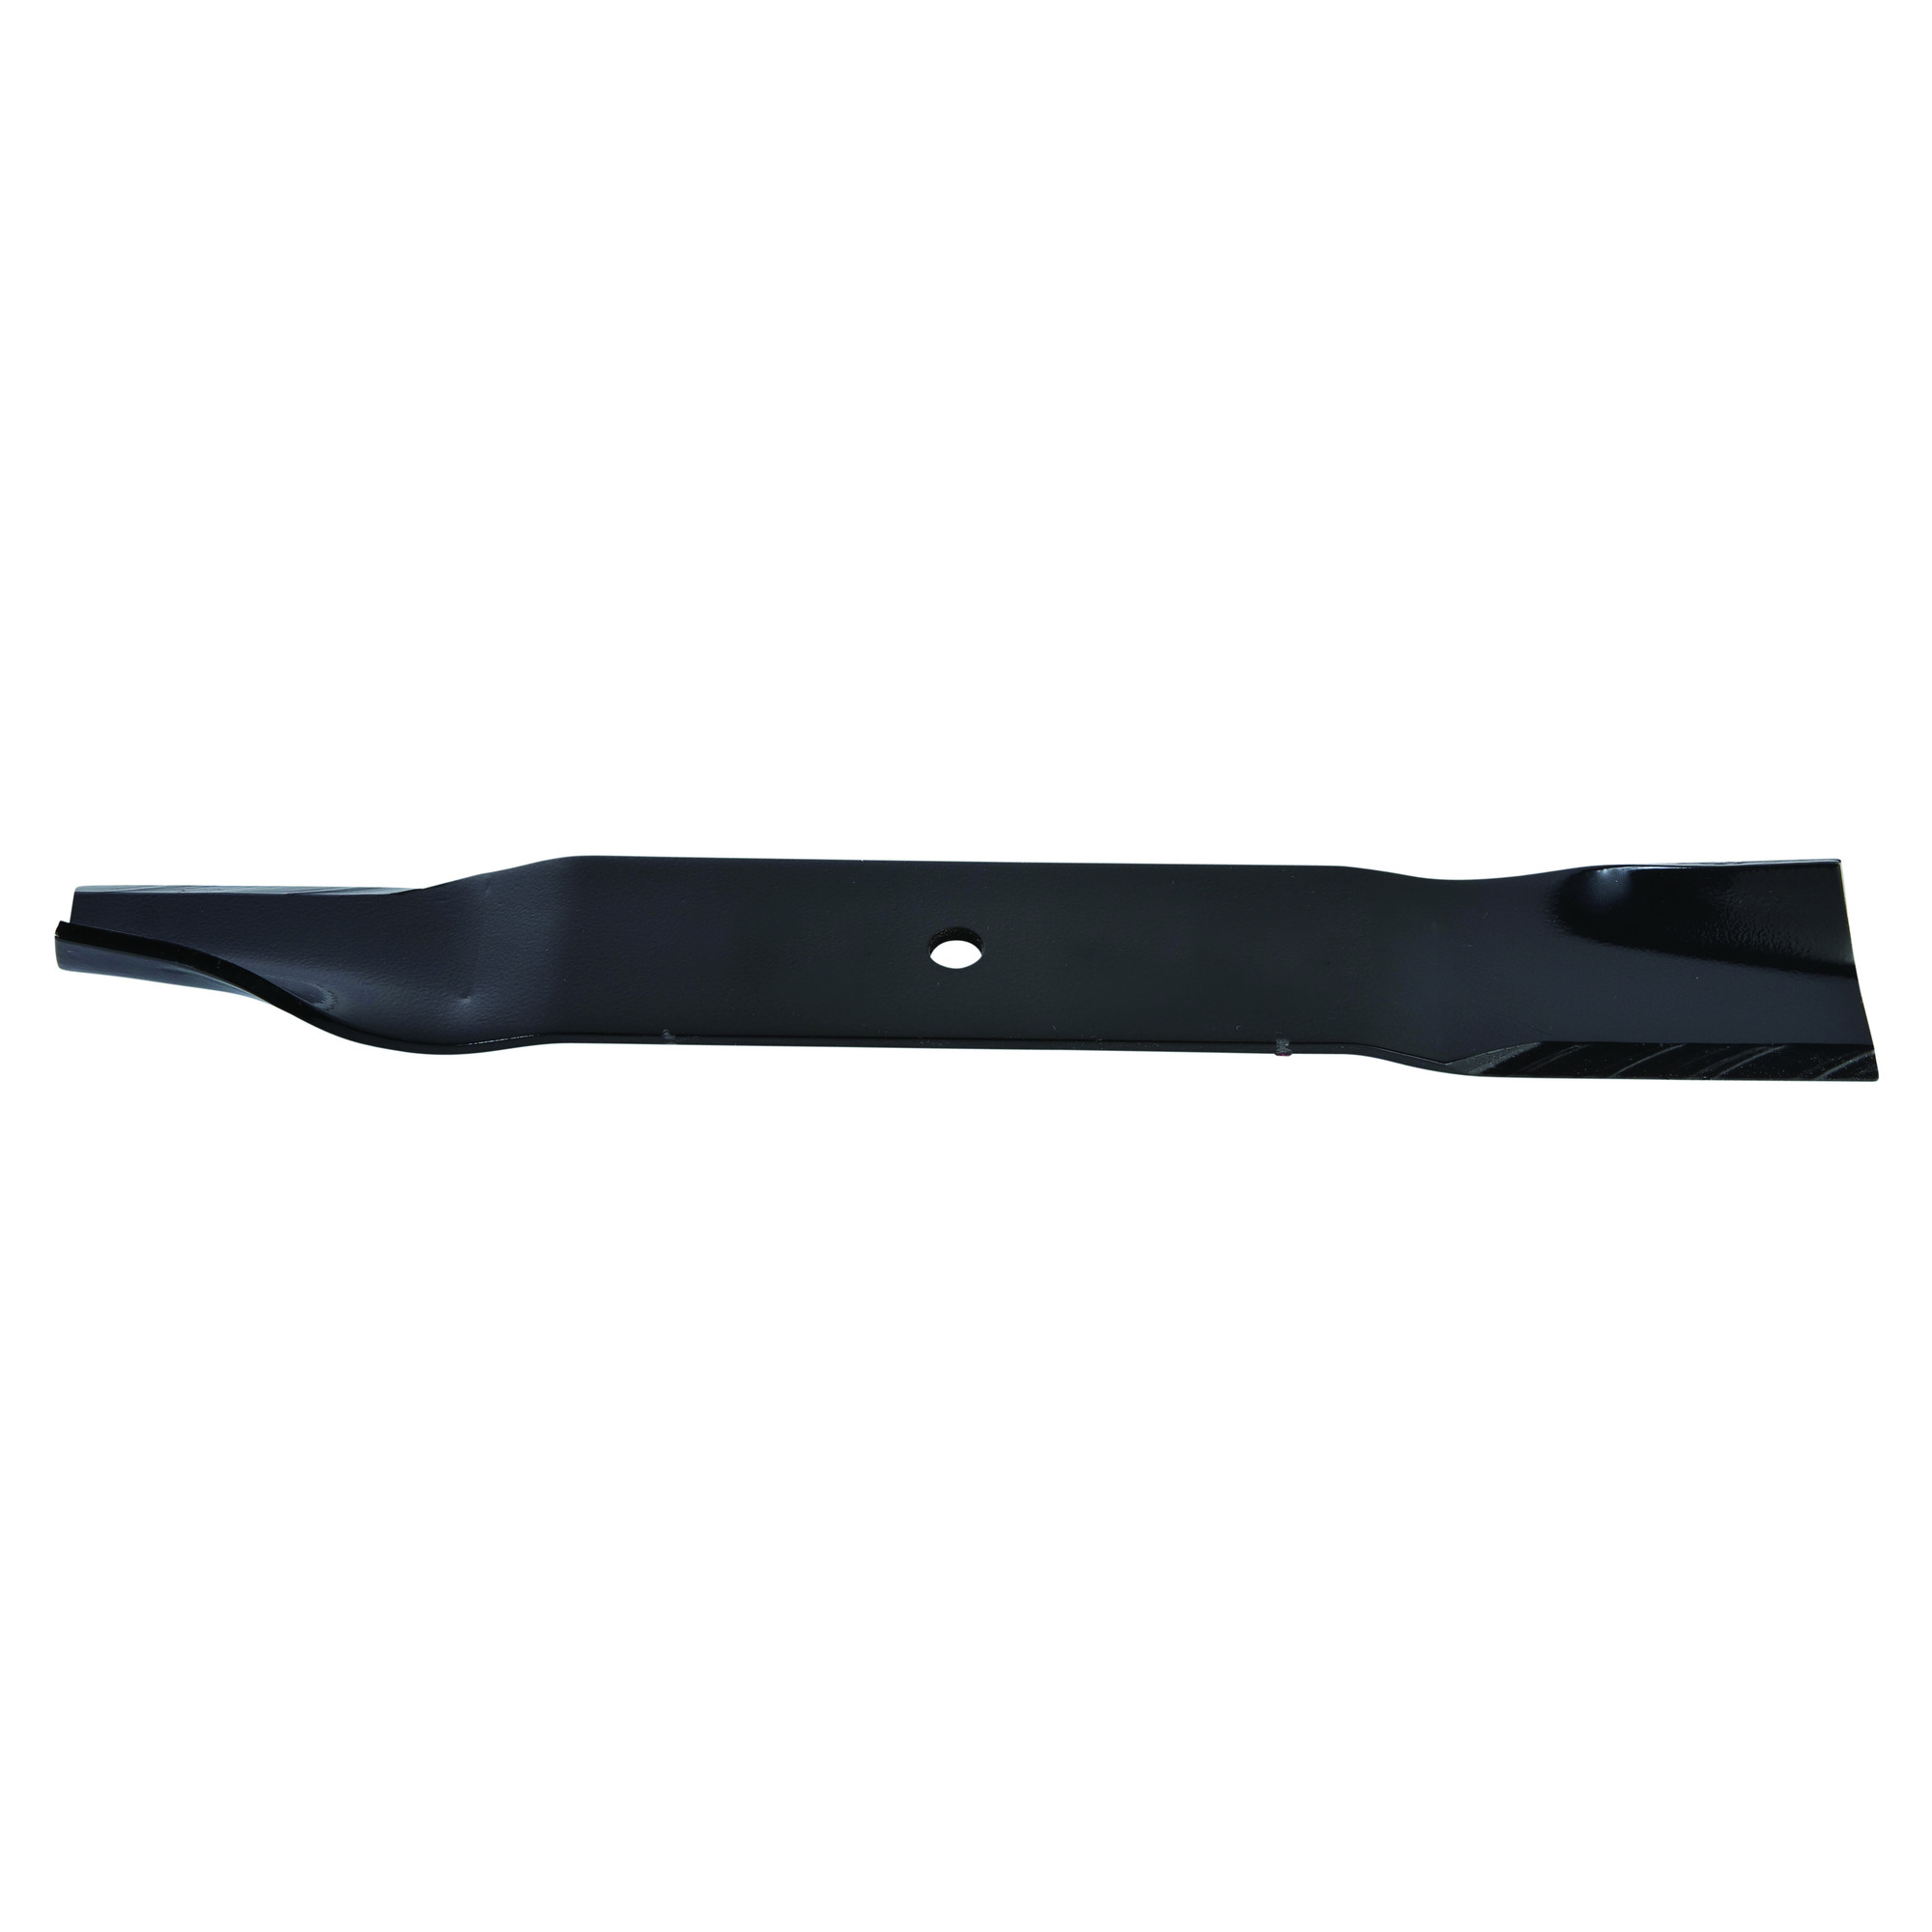 Oregon, Replacement Lawn Mower Blade, Length 18.375 in, Model 91-129